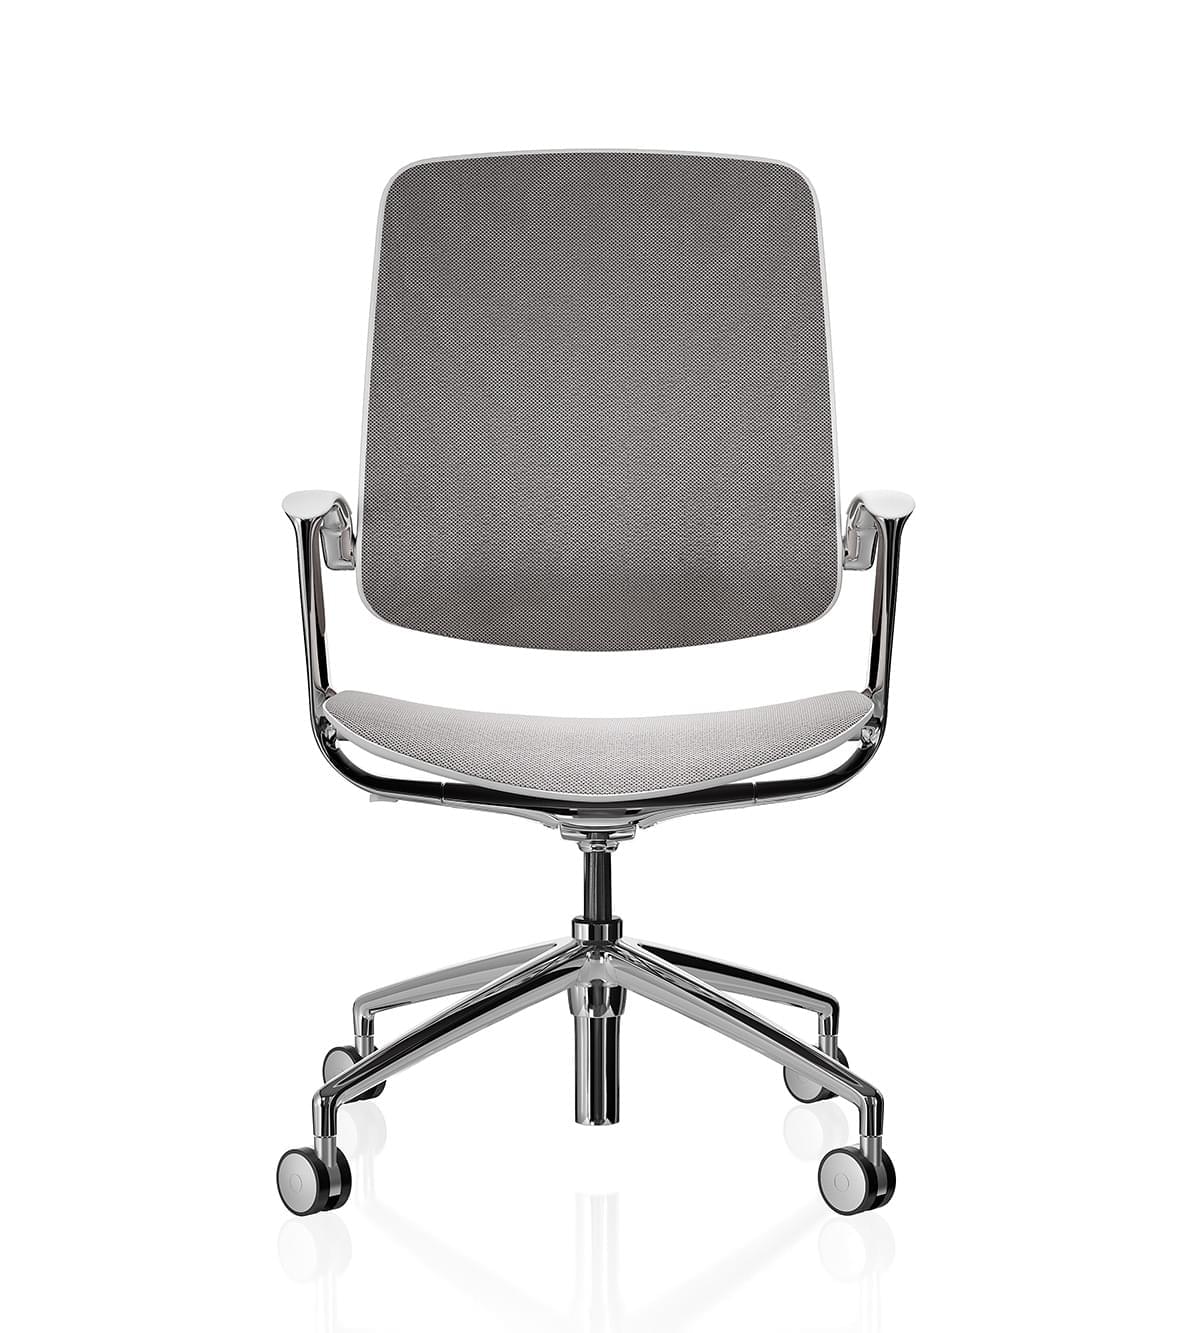 Trinetic Mesh Chair - White frame polished 4 star base with castors front